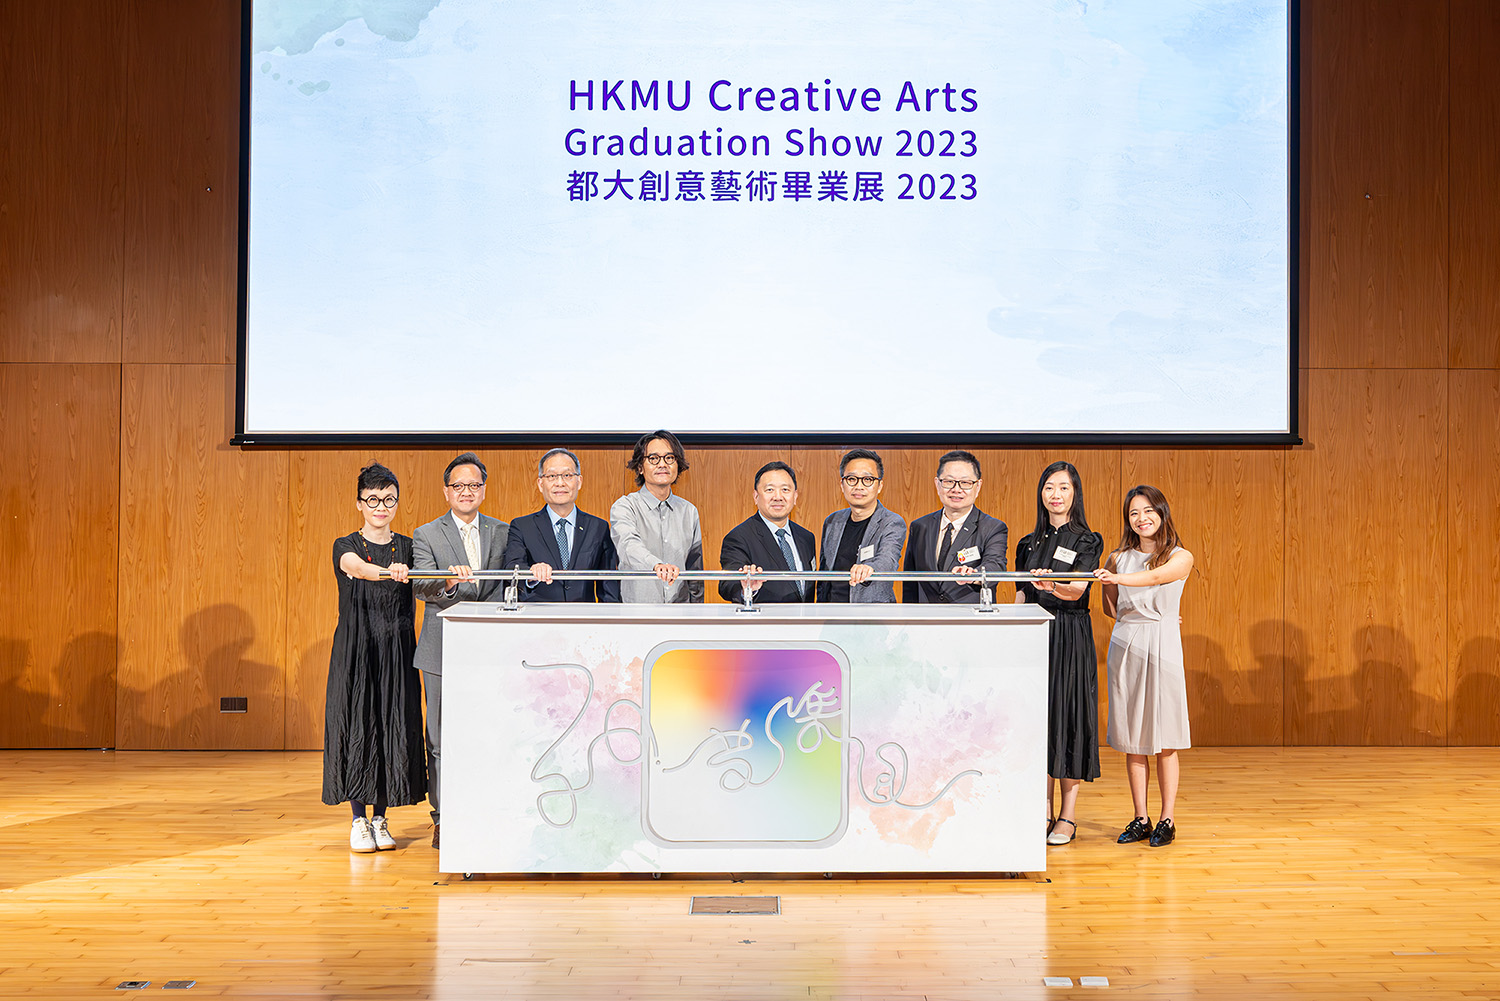 Distinguished guests officiate at the Opening Ceremony of the HKMU Creative Arts Graduation Show 2023.